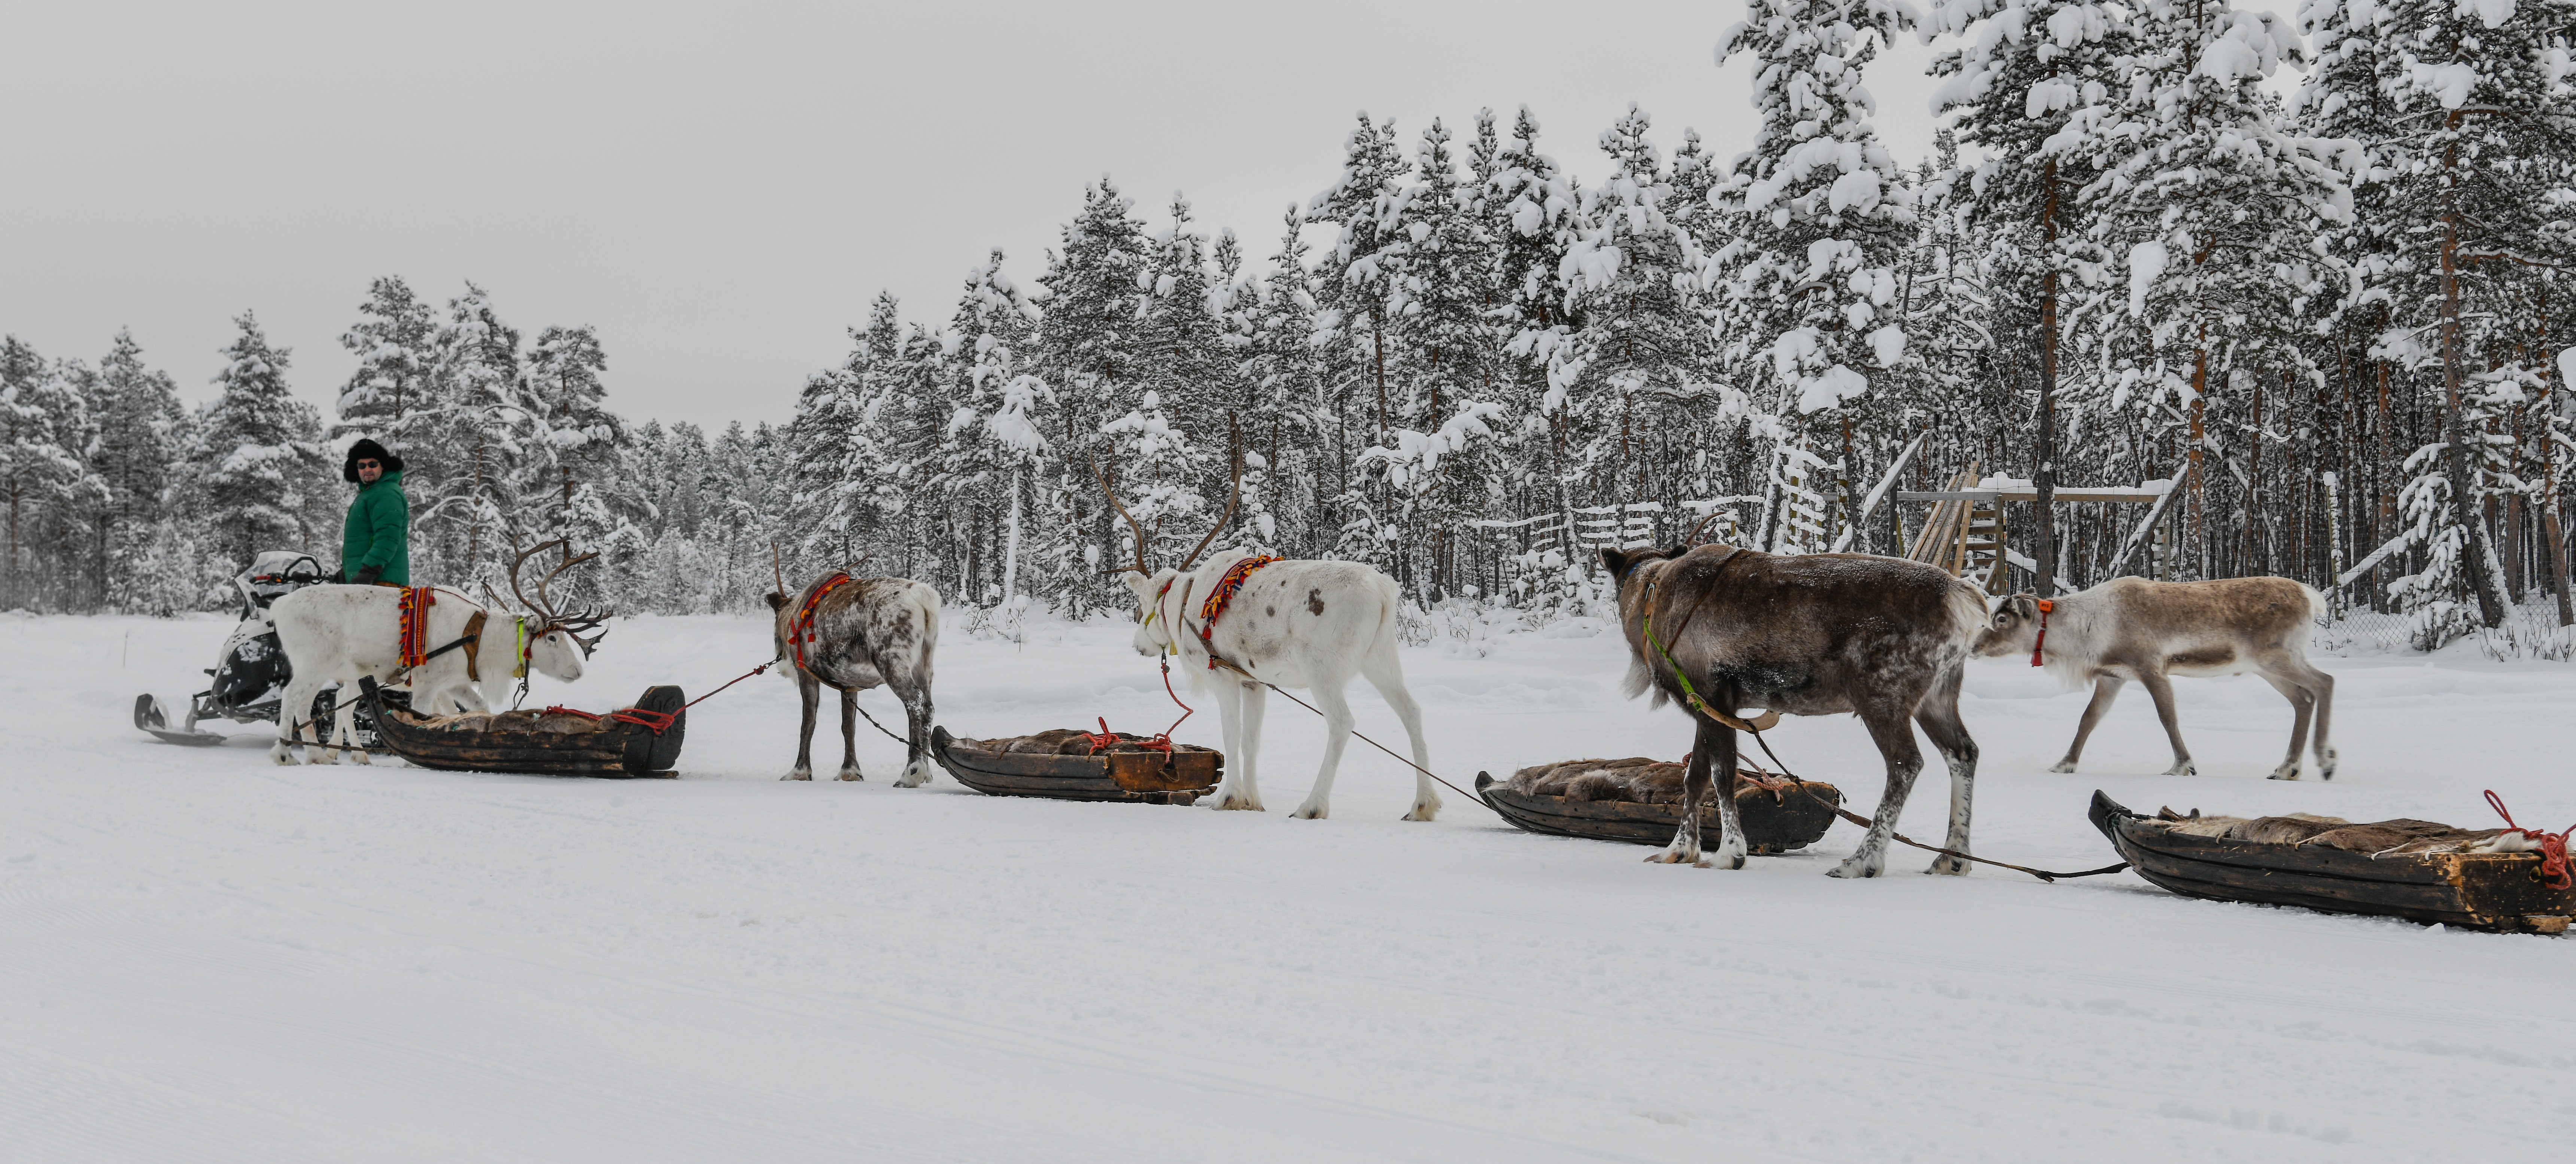 reindeer lined up with sleds and man at the helm standing in snow